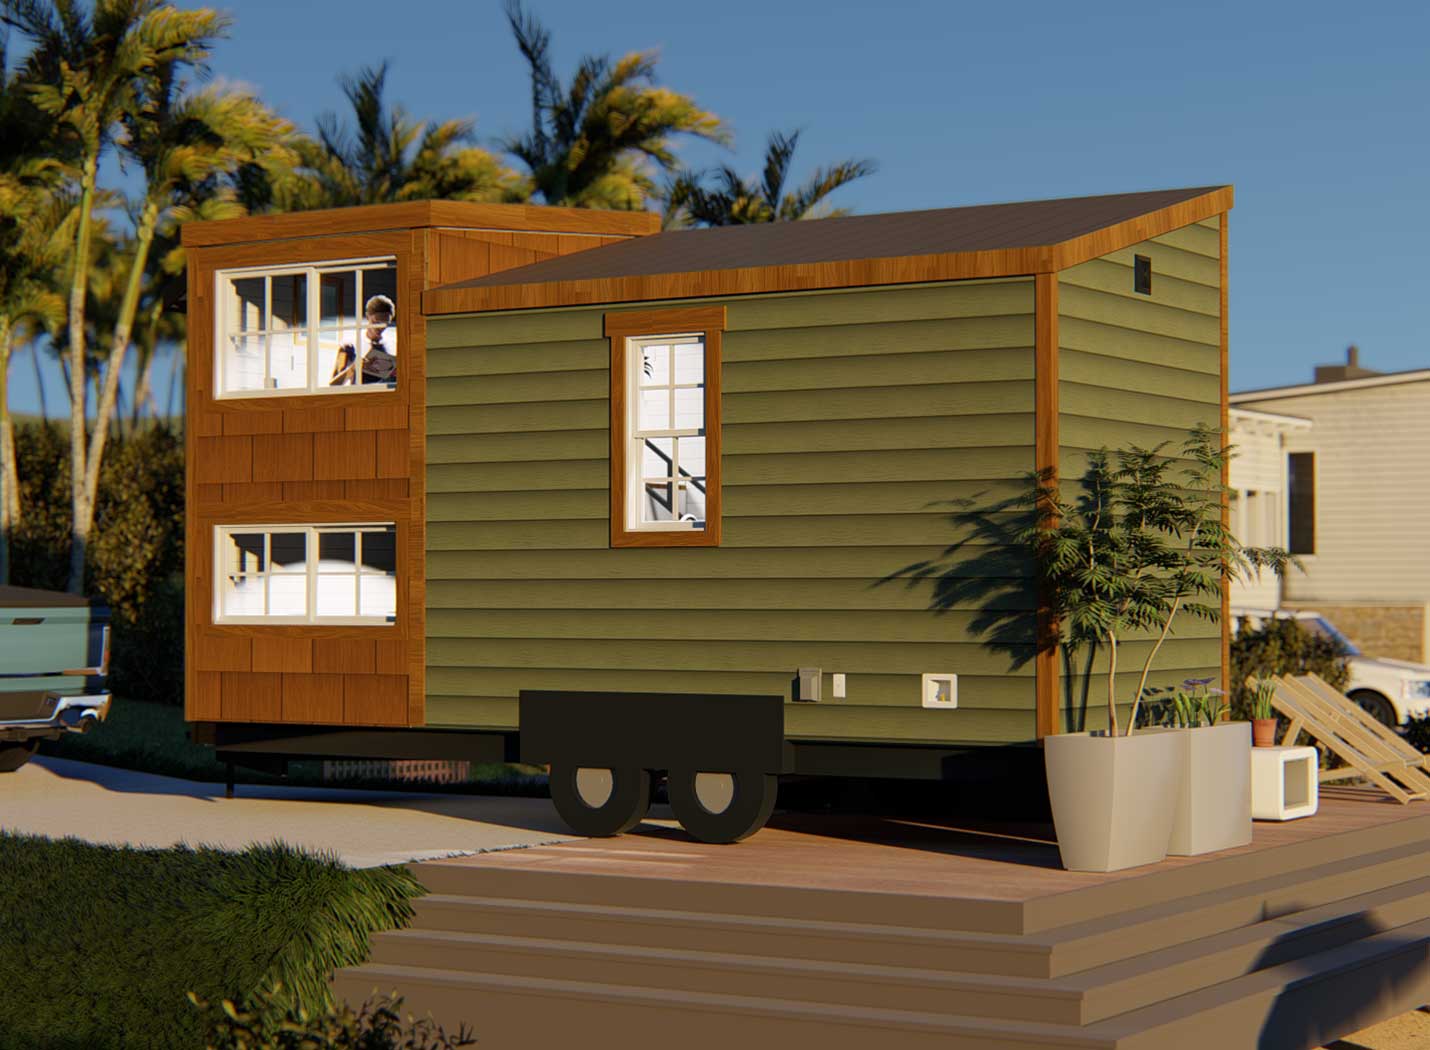 Exterior of the Keepsake Tiny home for sale in the craftsman style (3d rendering)